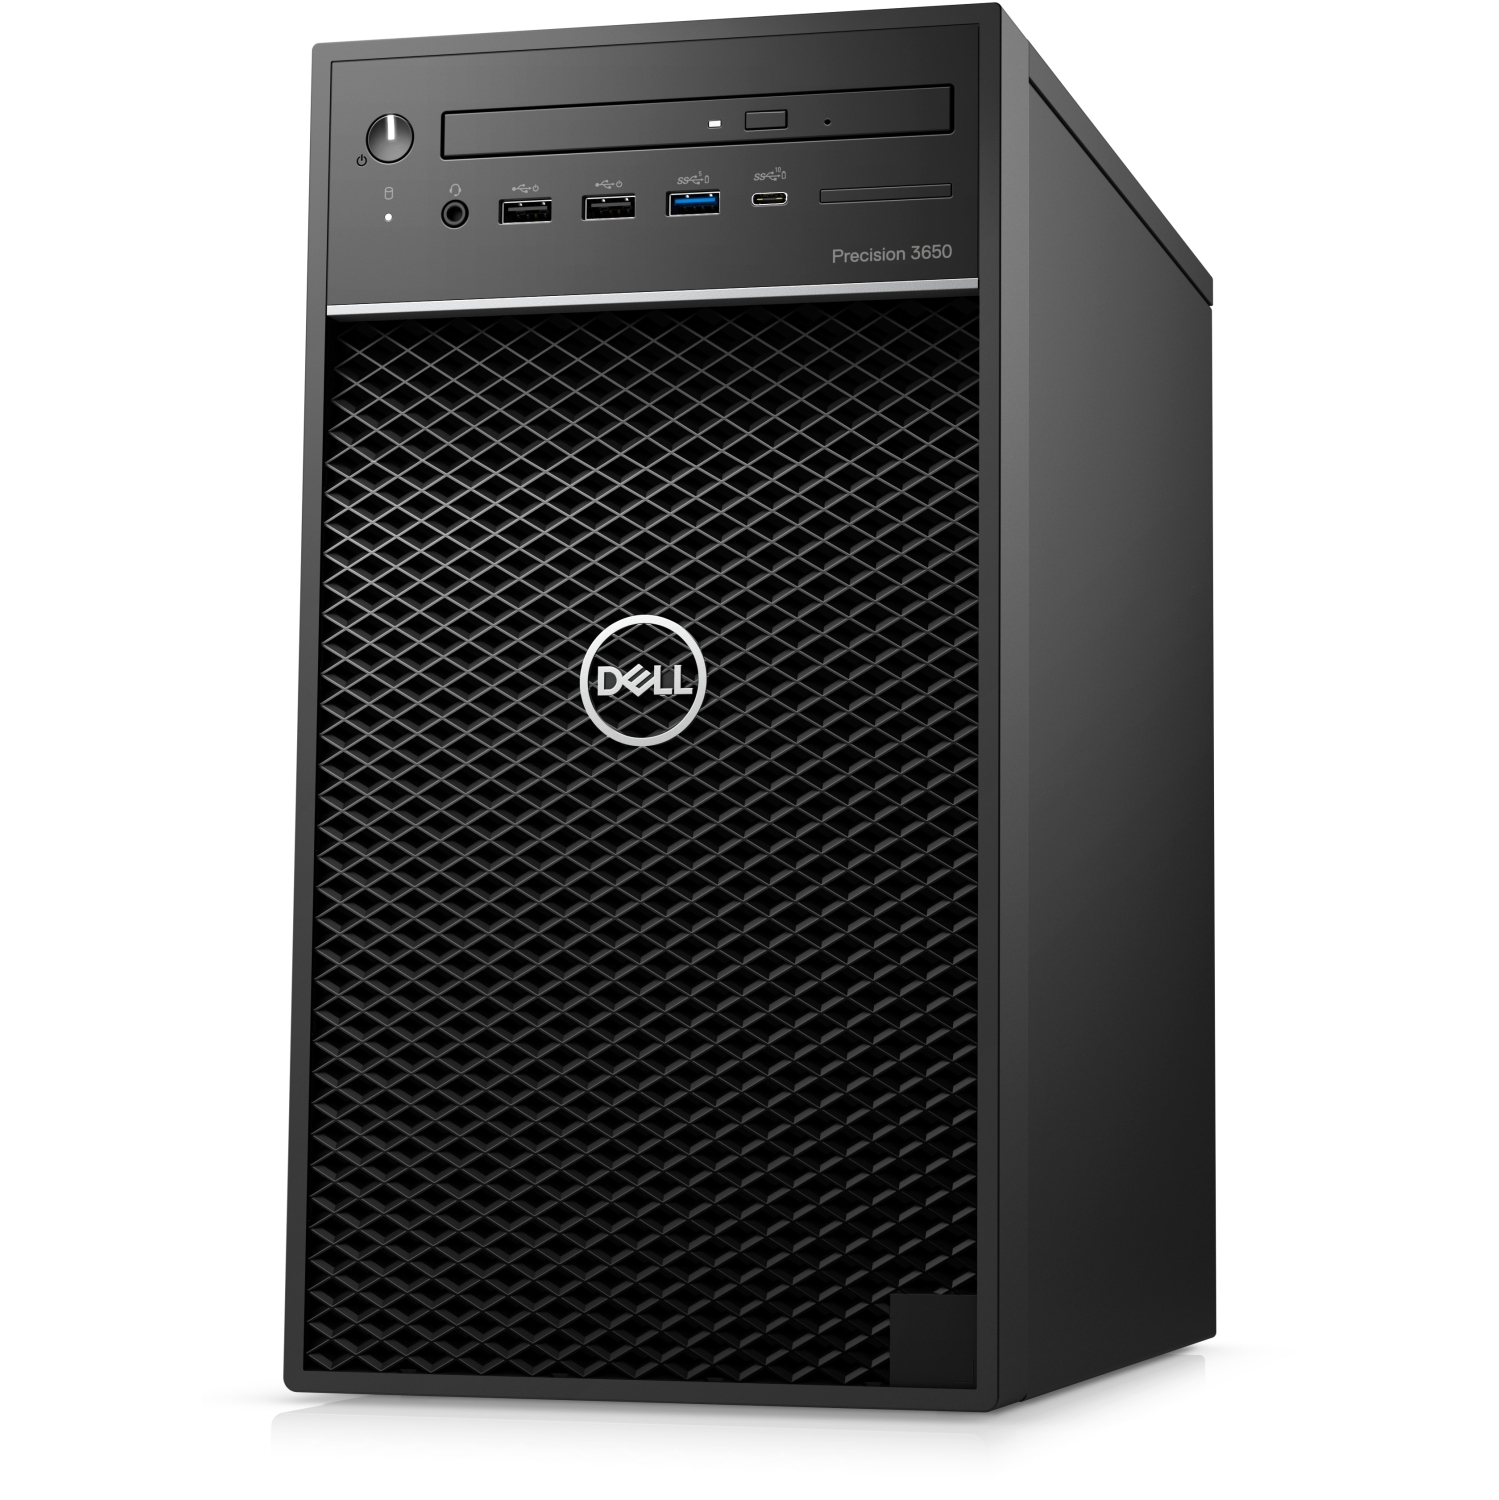 Refurbished (Excellent) - Dell Precision T3650 Workstation Desktop (2021), Core i9, 512GB SSD, 32GB RAM, RTX 3090, 8 Cores @ 4.9 GHz, 11th Gen CPU Certified Refurbished